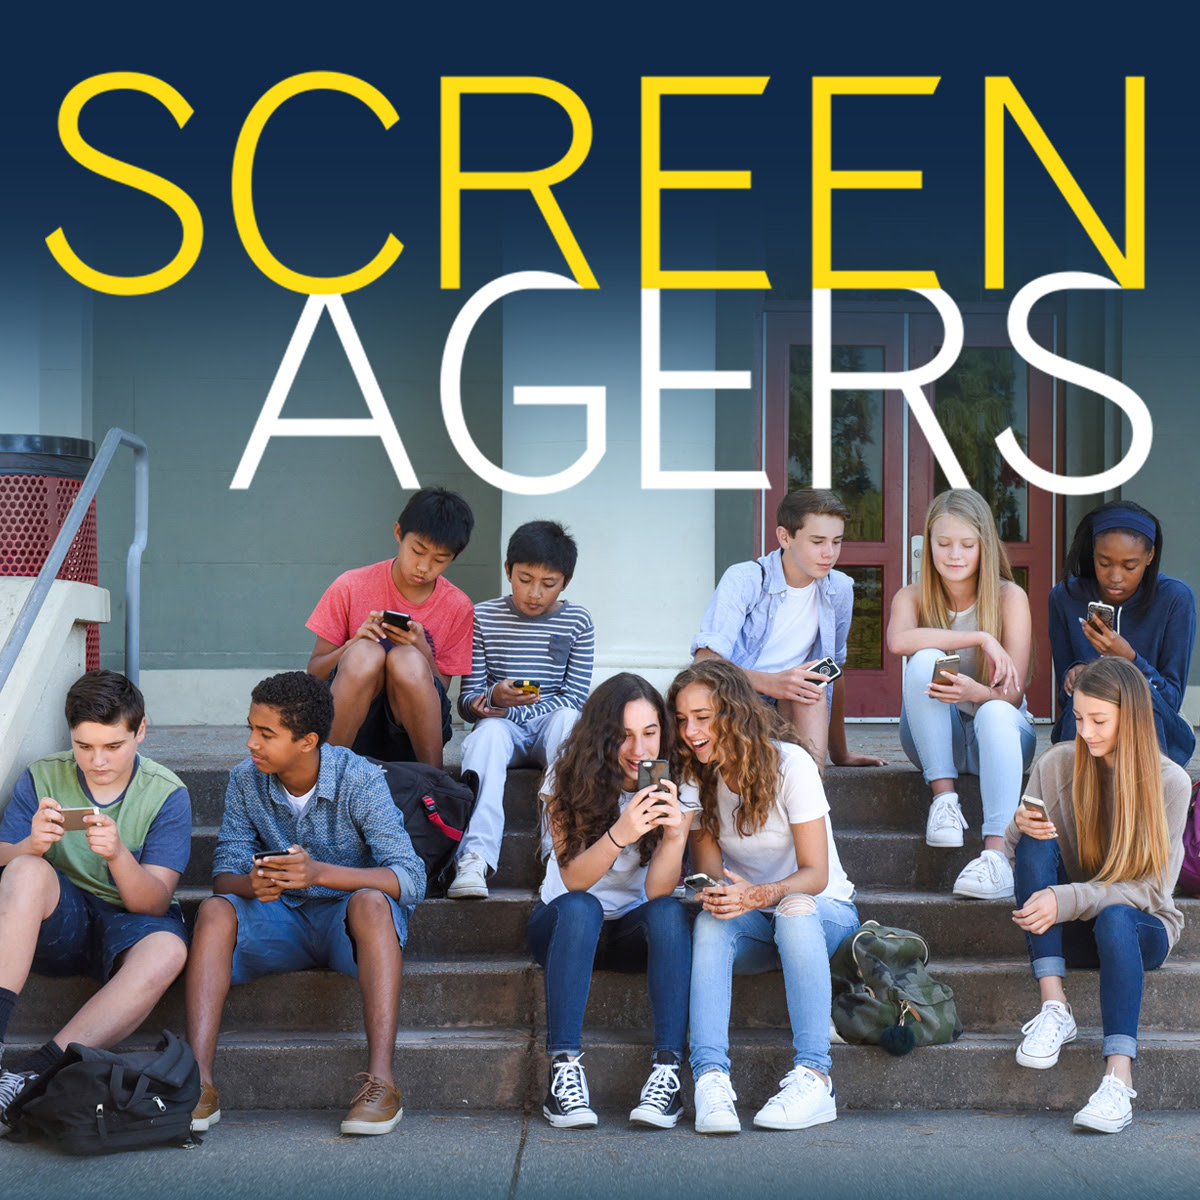 Screenagers Film Presented By Immaculate Conception School